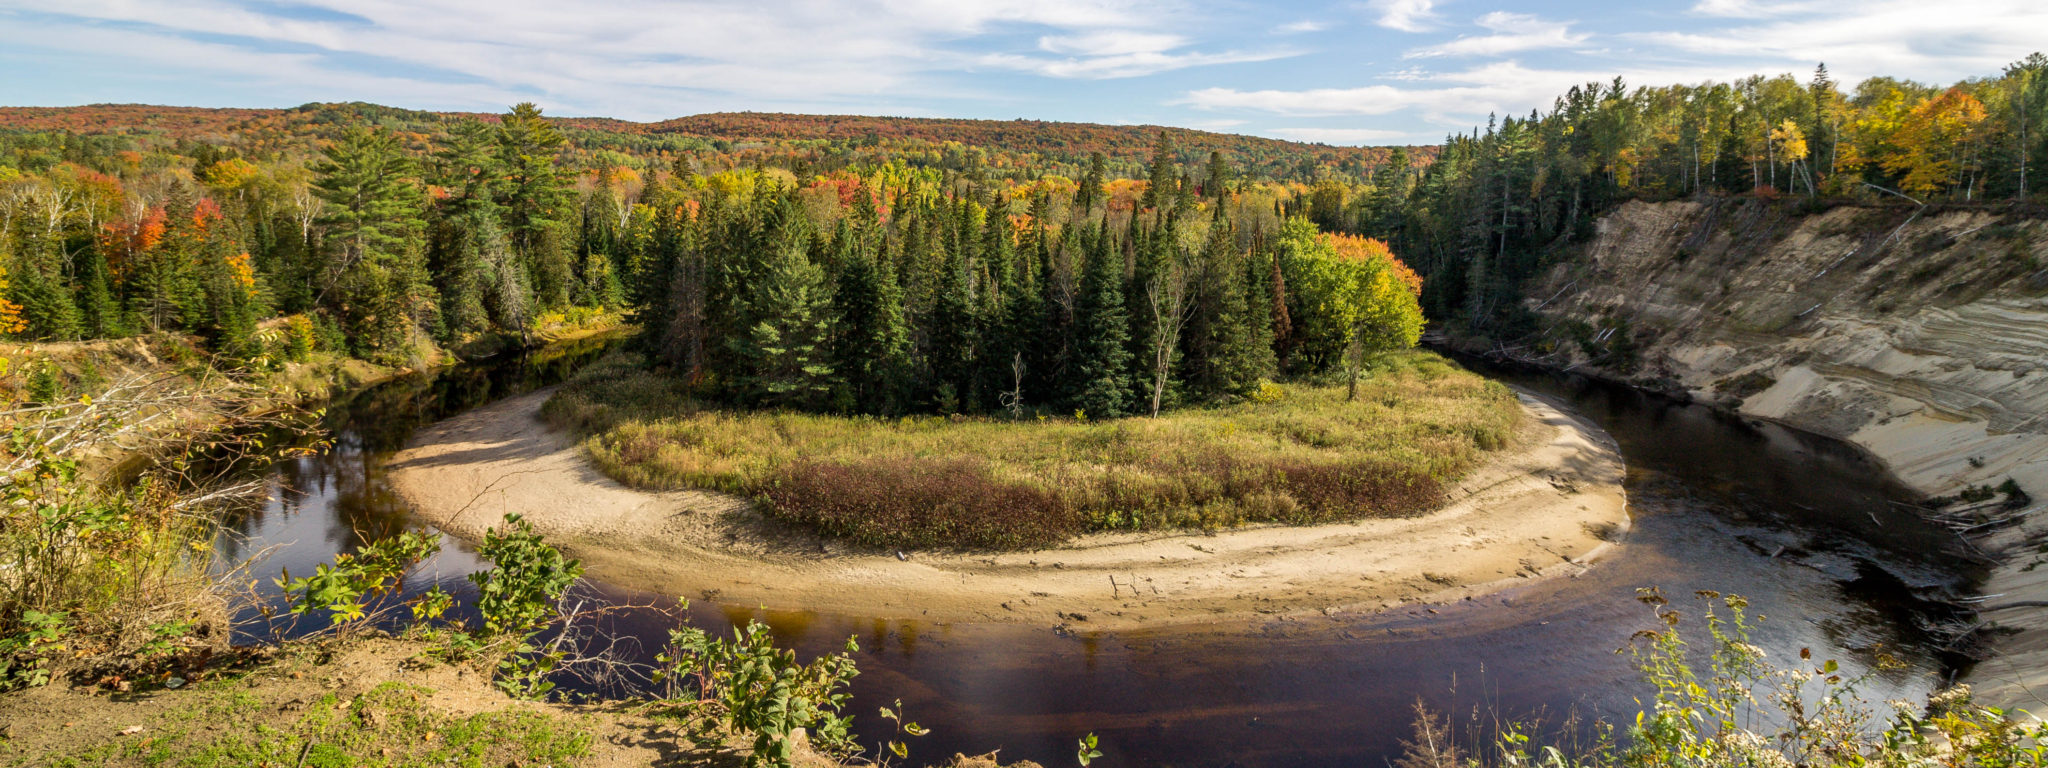 Big Bend lookout at Arrowhead Provincial Park. This is a great place to view the fall colours of Ontario and enjoy autumn in Huntsville.